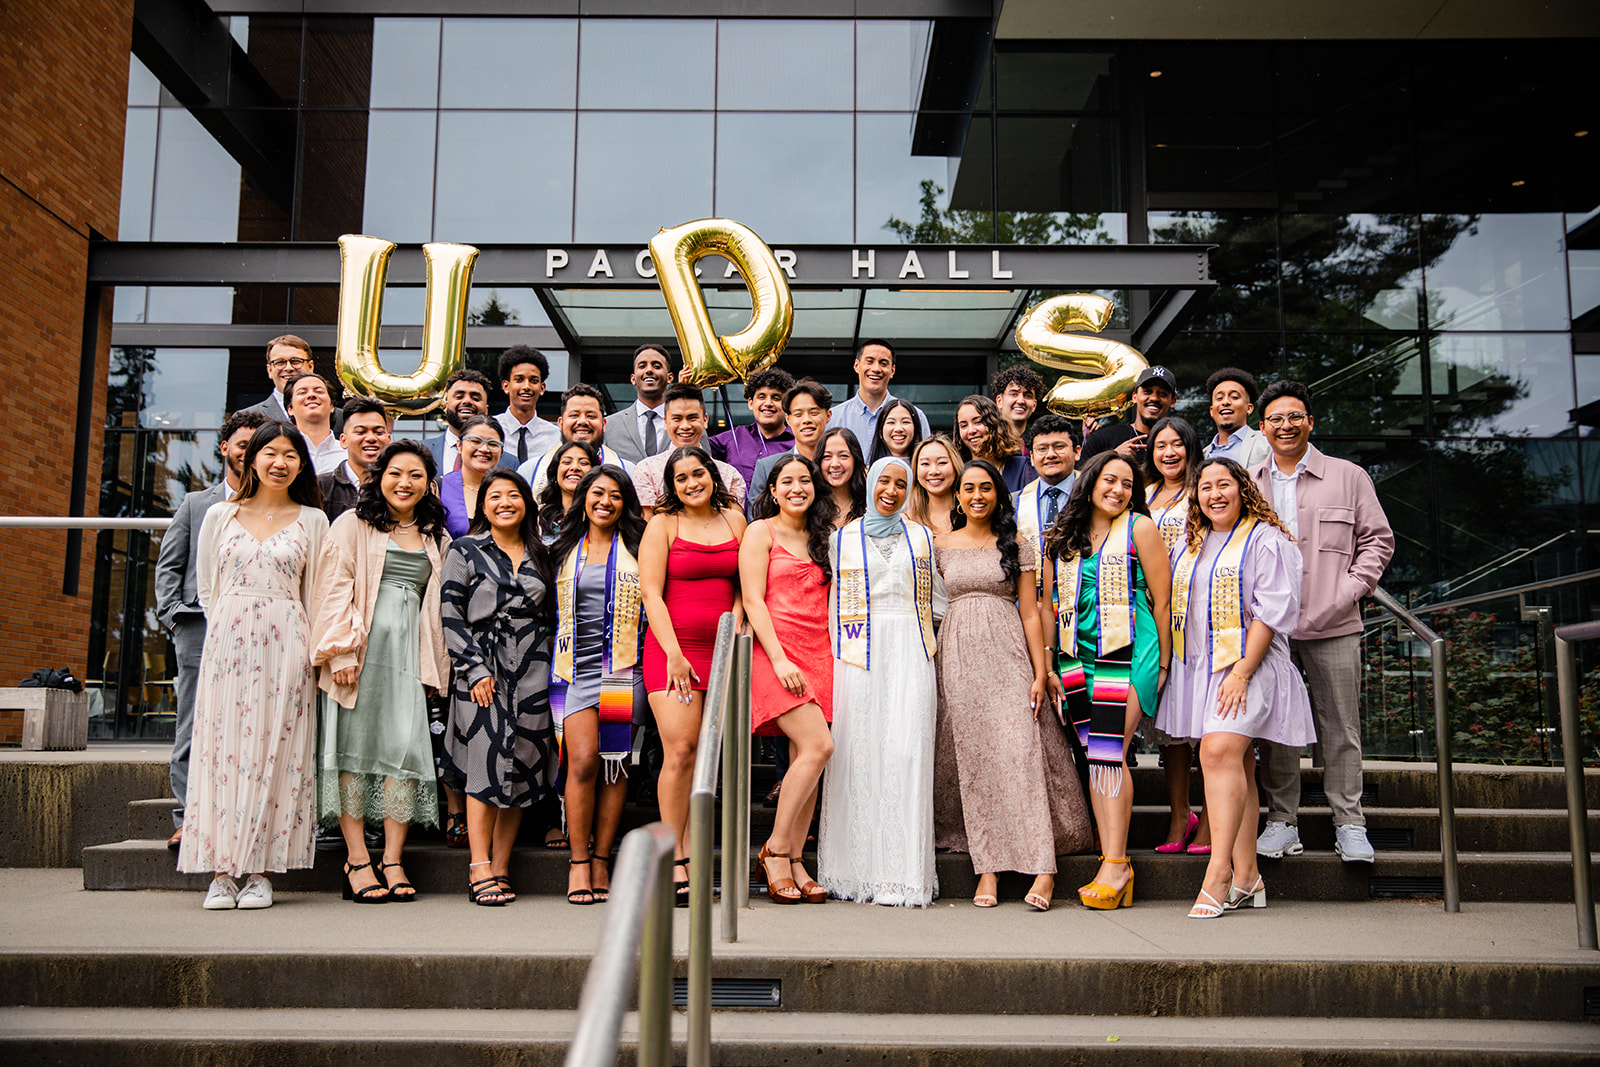 Undergrad diversity services alumni who graduated from UW in 2020, 2021 and 2022